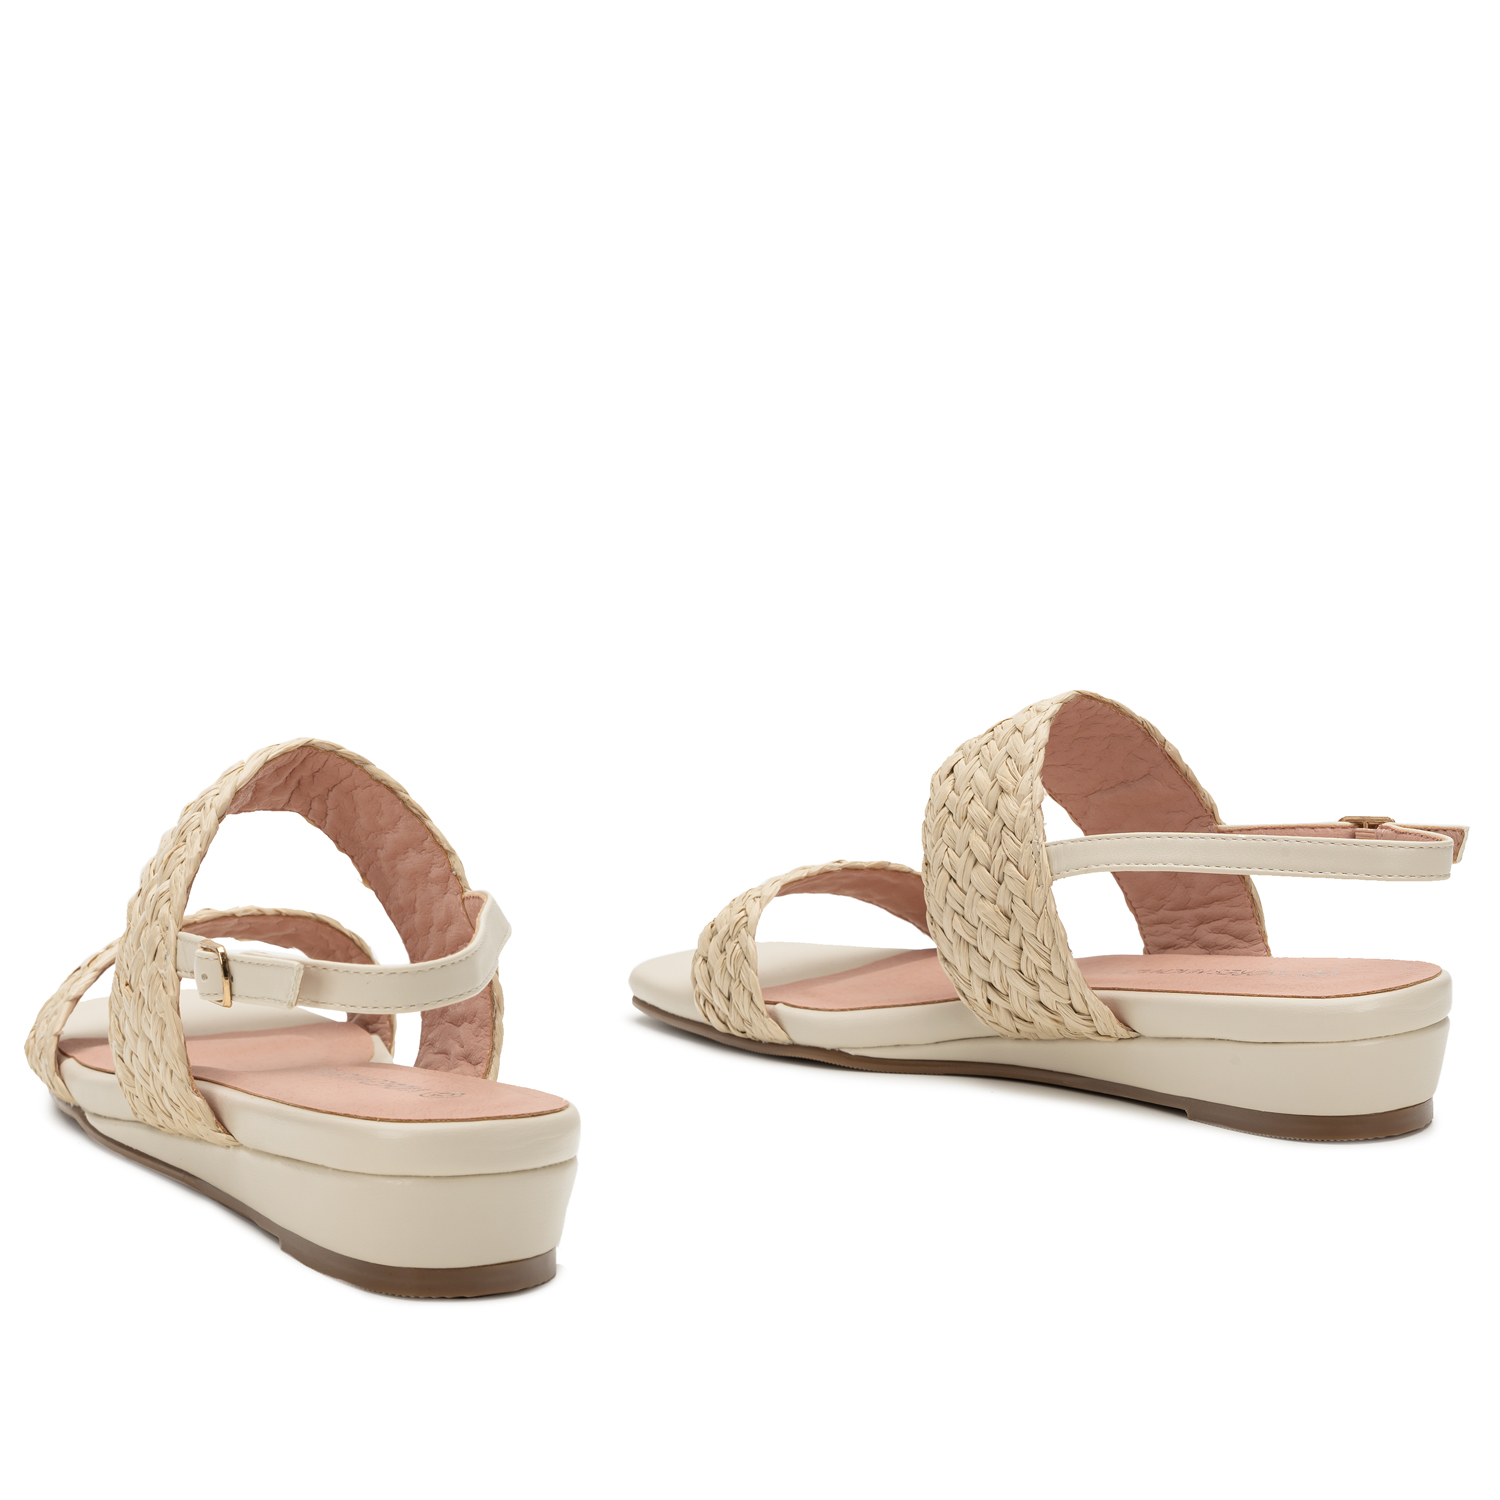 Beige Faux Leather Braided Sandals 